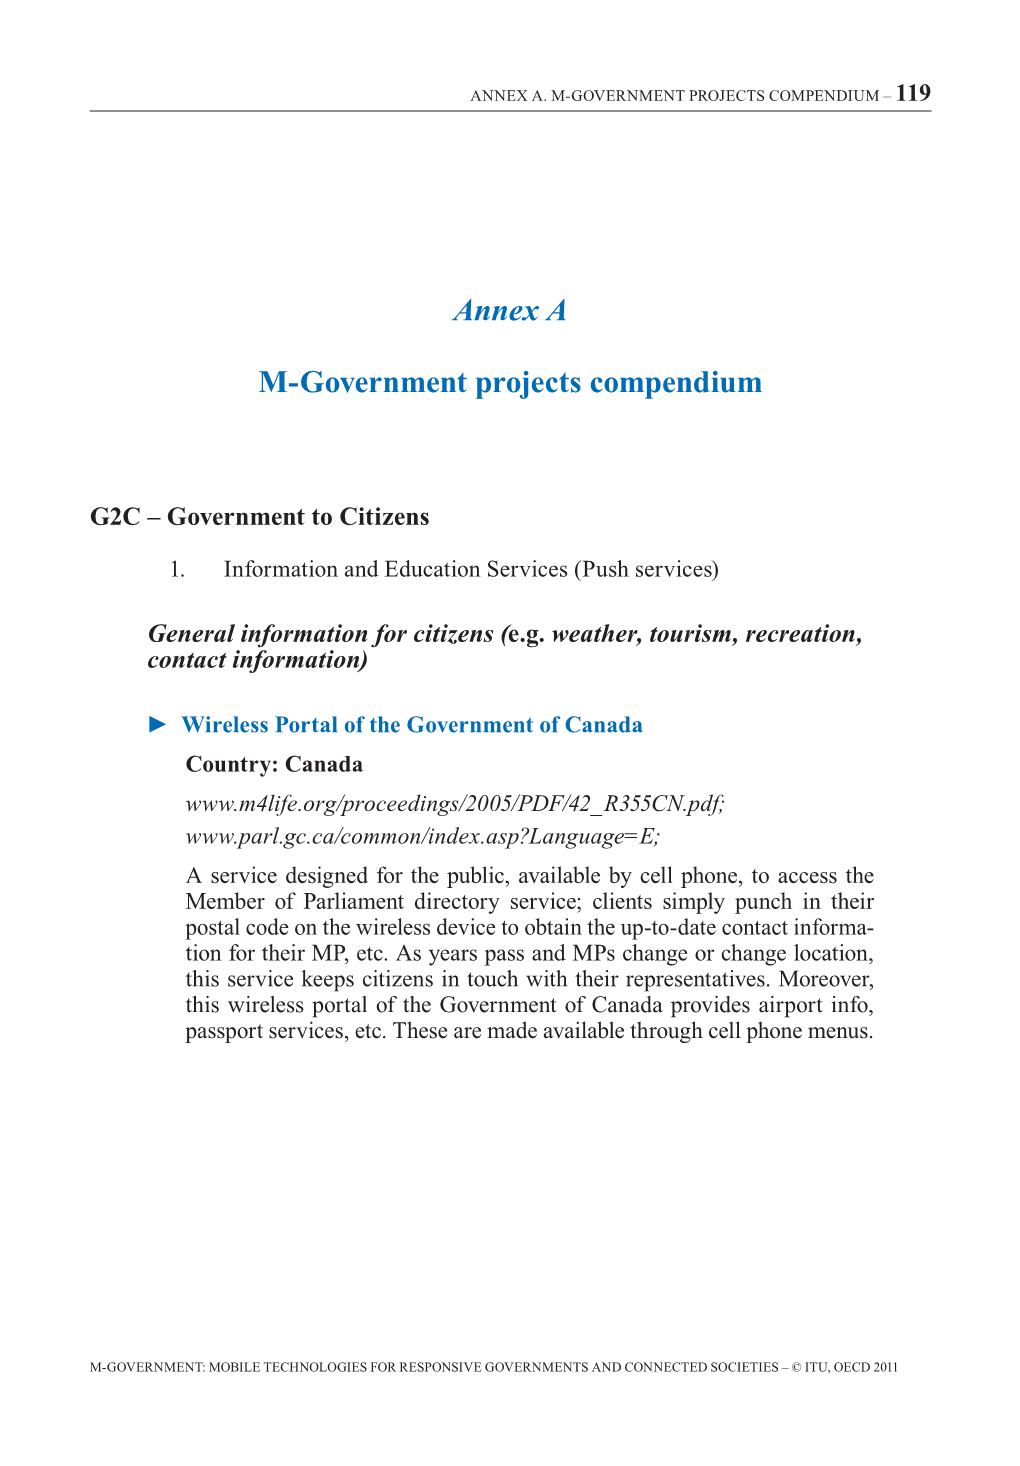 M-Government Projects Compendium – 119